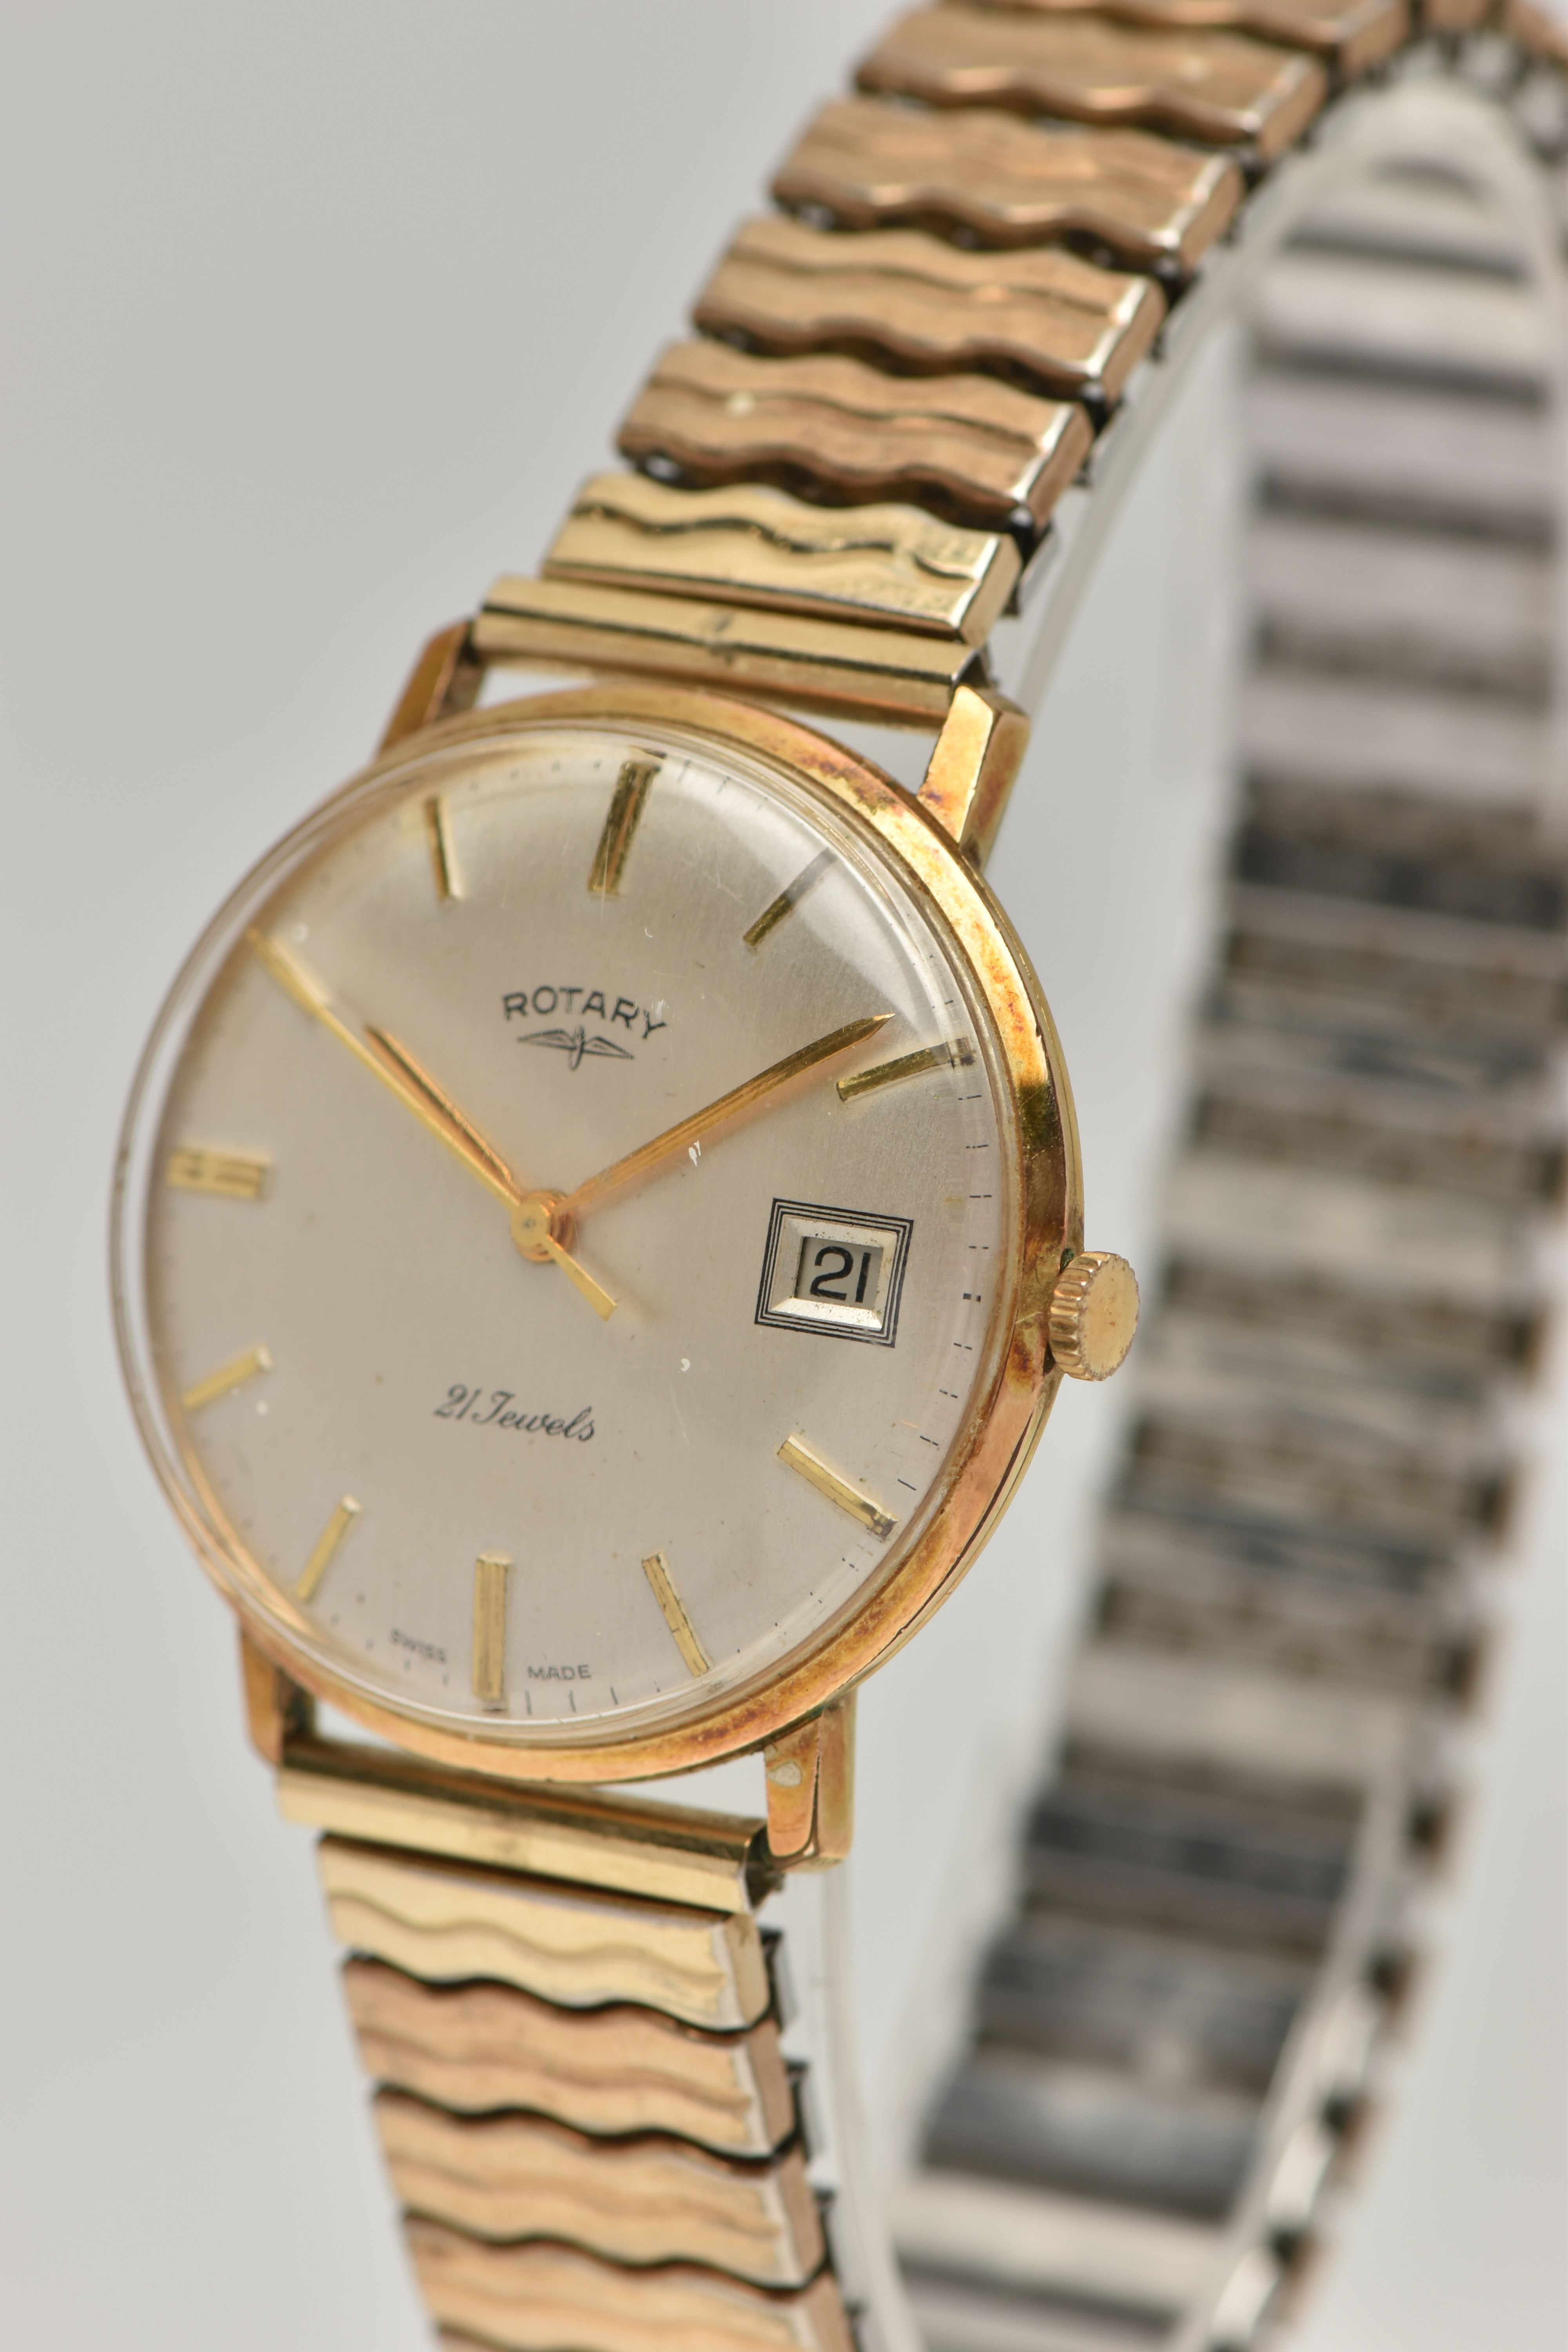 A GENTS 'ROTARY' WRISTWATCH, manual wind, round silvered dial signed 'Rotary 21 Jewels', baton - Image 3 of 6